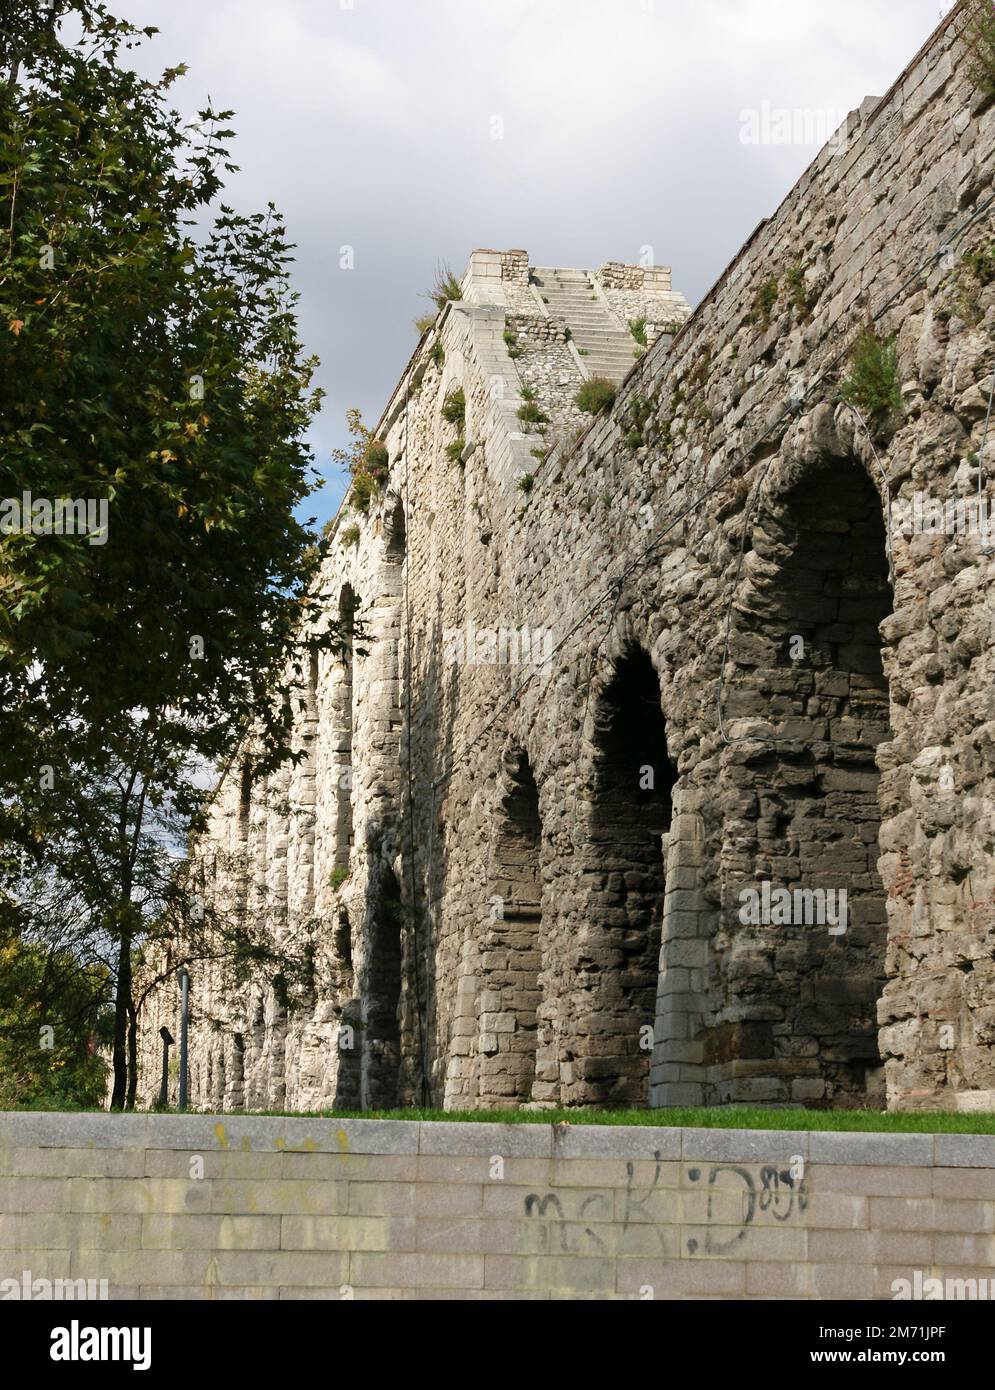 Located in Istanbul, Turkey, the Bozdogan Aqueduct was built during the Roman period. Stock Photo